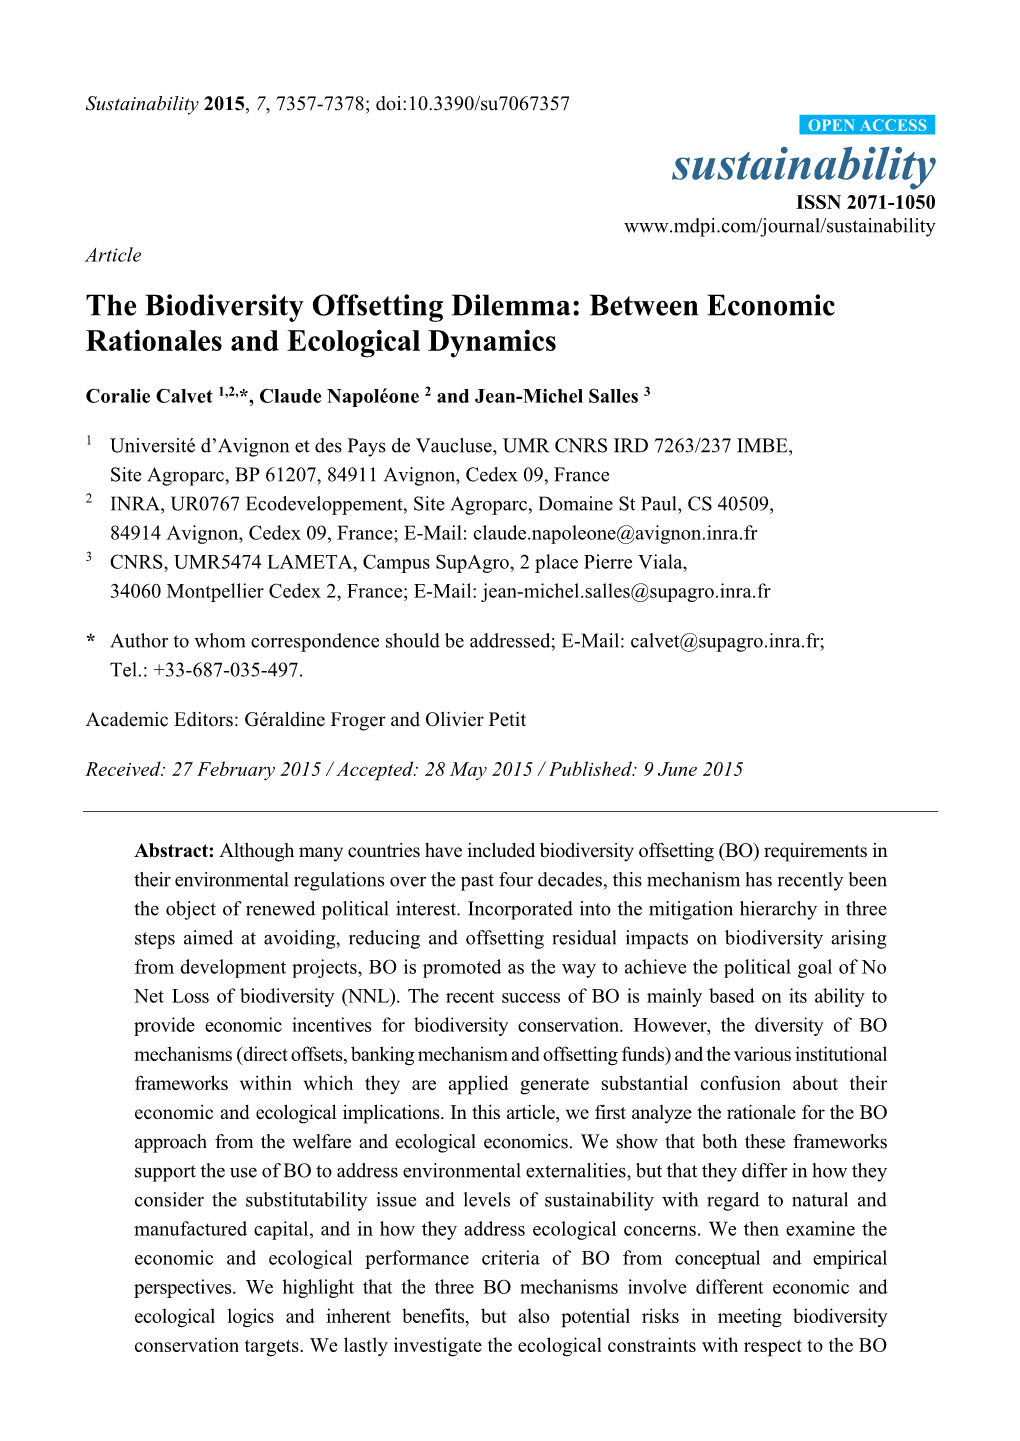 The Biodiversity Offsetting Dilemma: Between Economic Rationales and Ecological Dynamics